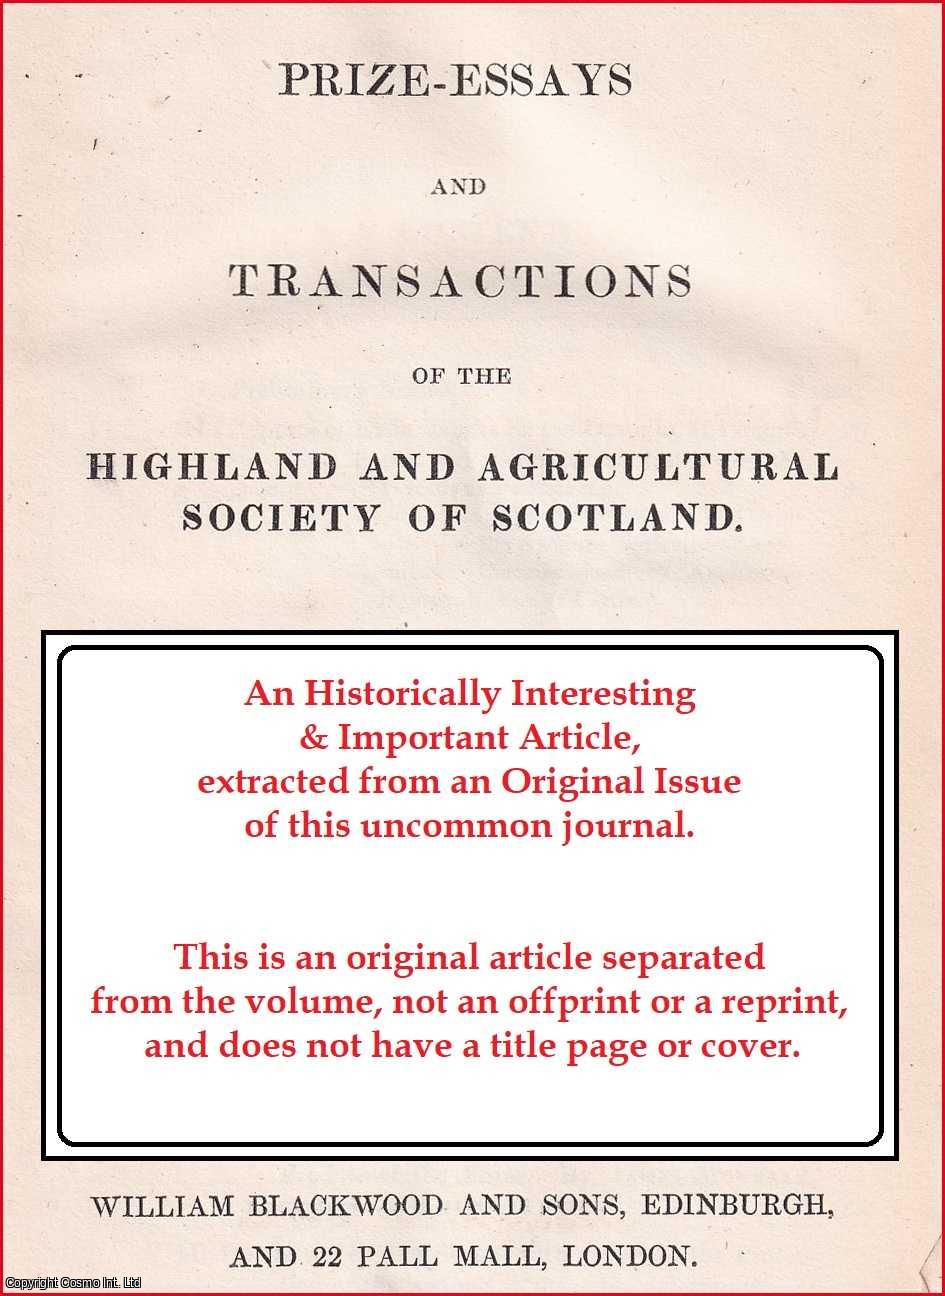 John Boswell, Esq. of Kingcausie, Kincardineshire. - The Comparative Advantages of Feeding Cattle in Close Byres & Open Hemmels. An uncommon original article from the Prize Essays and Transactions of the Highland Society of Scotland, 1837.